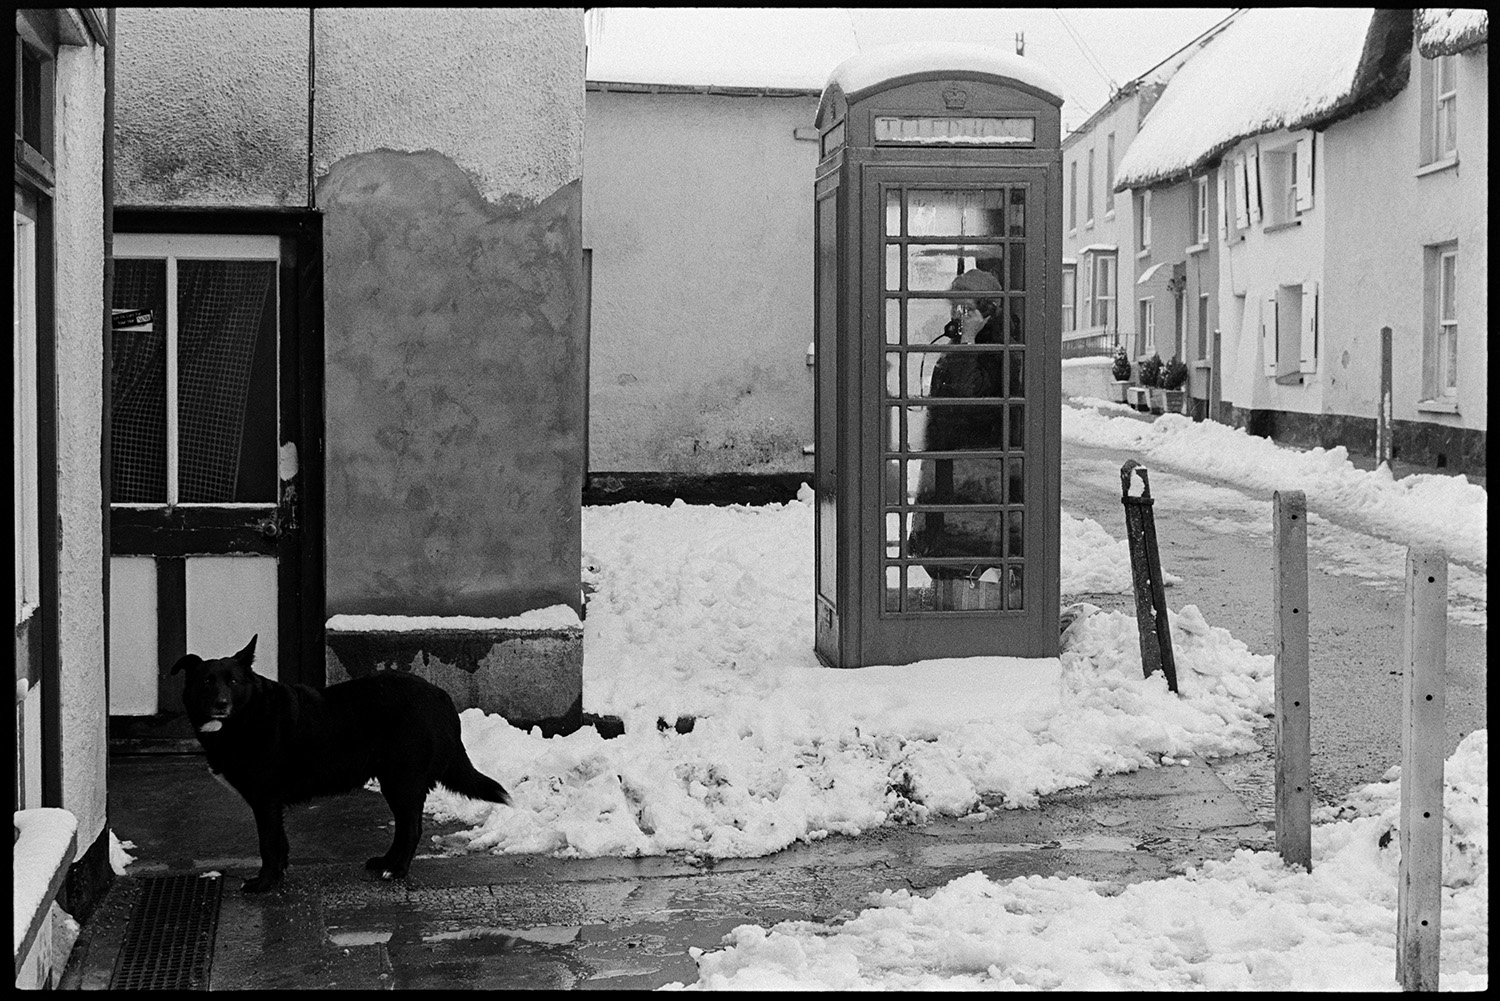 Snow, Street scenes with men spreading grit on road, woman telephoning from kiosk. 
[A woman using the telephone box in Fore Street, Dolton. The street and thatched cottage outside are covered with snow and a dog is waiting outside Dolton Post Office.]